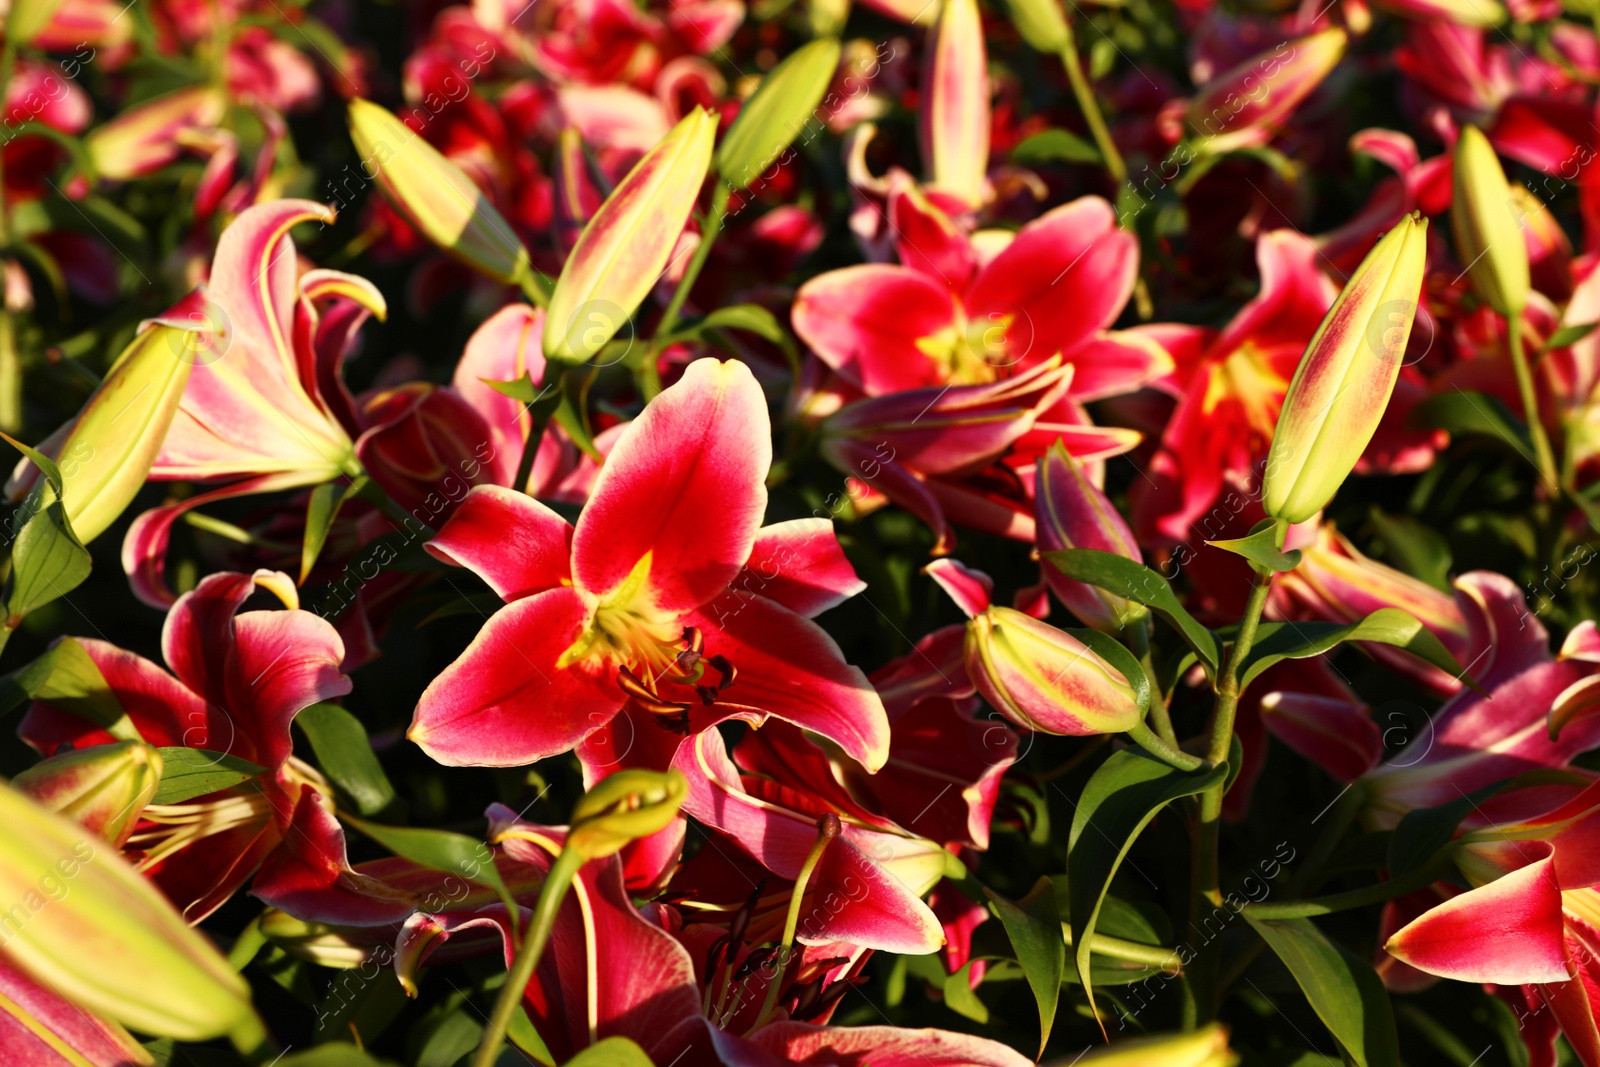 Photo of Beautiful bright pink lilies growing at flower field